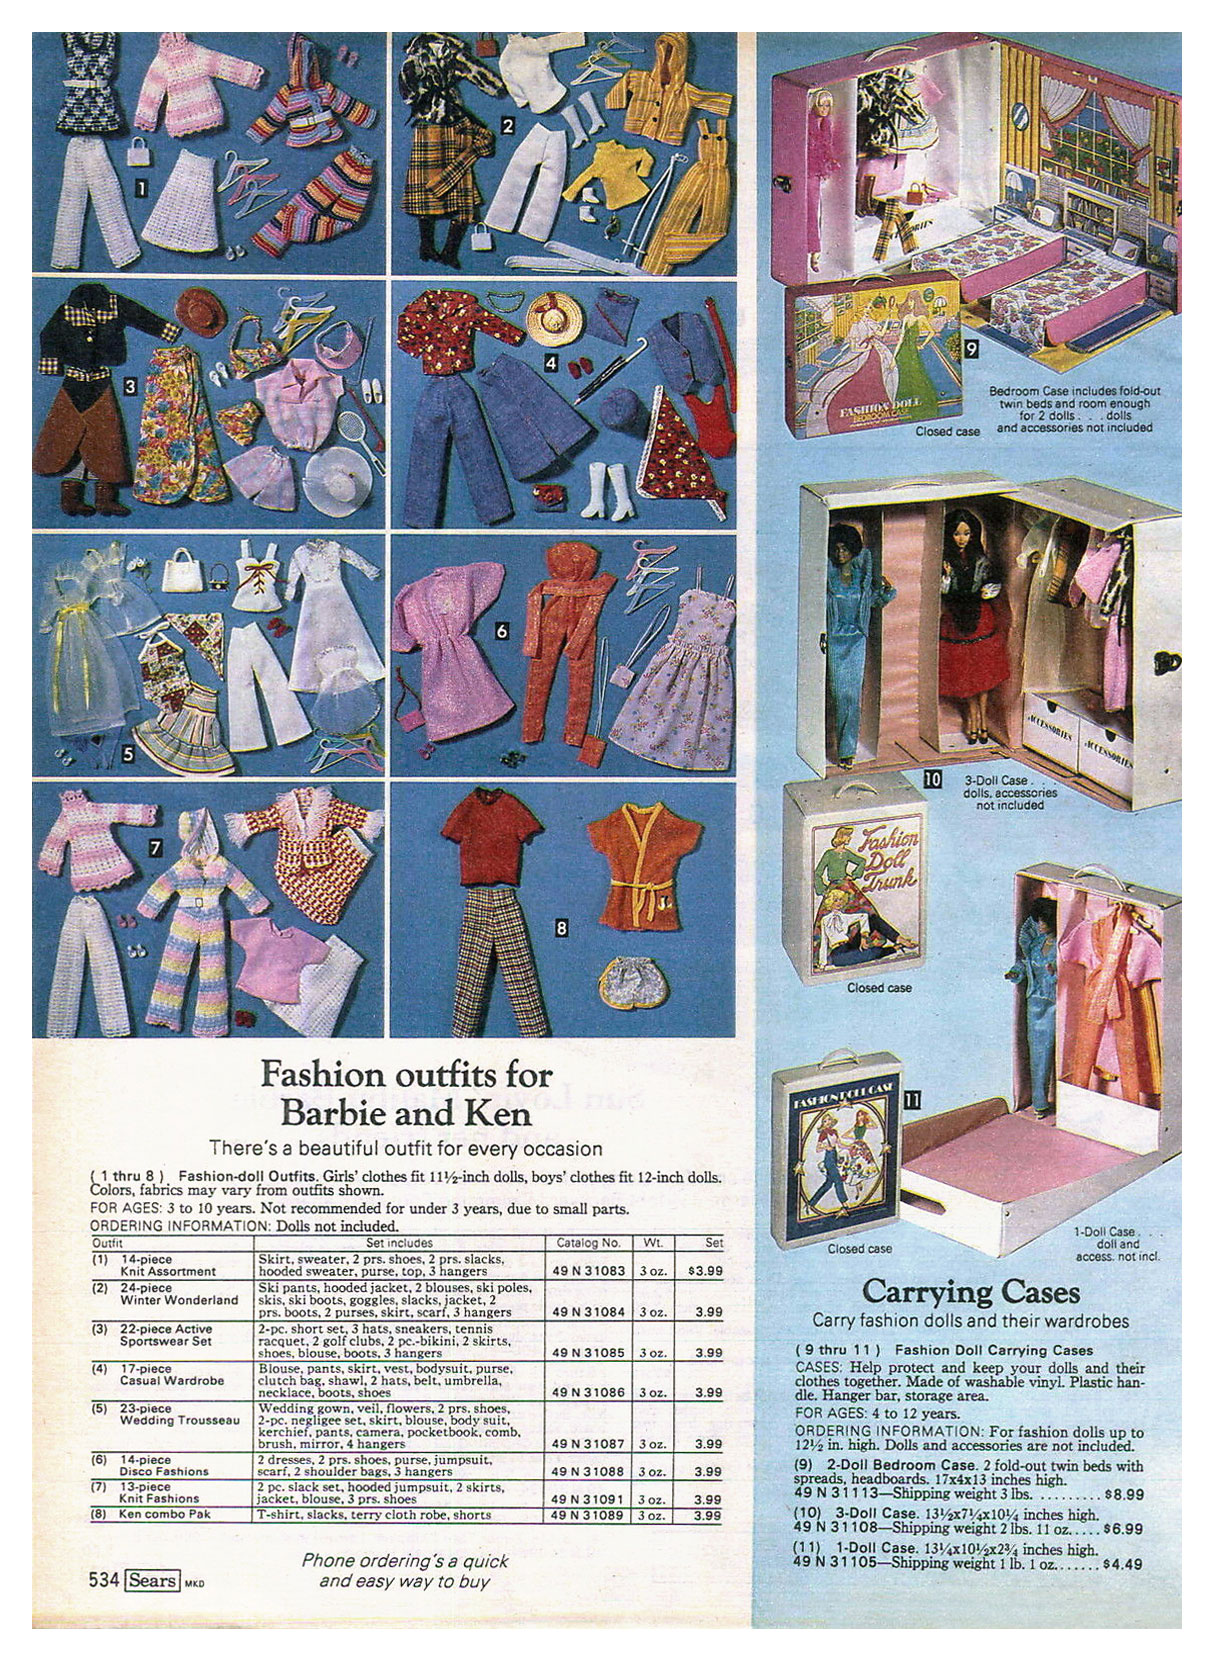 From 1980 Sears Wish Book